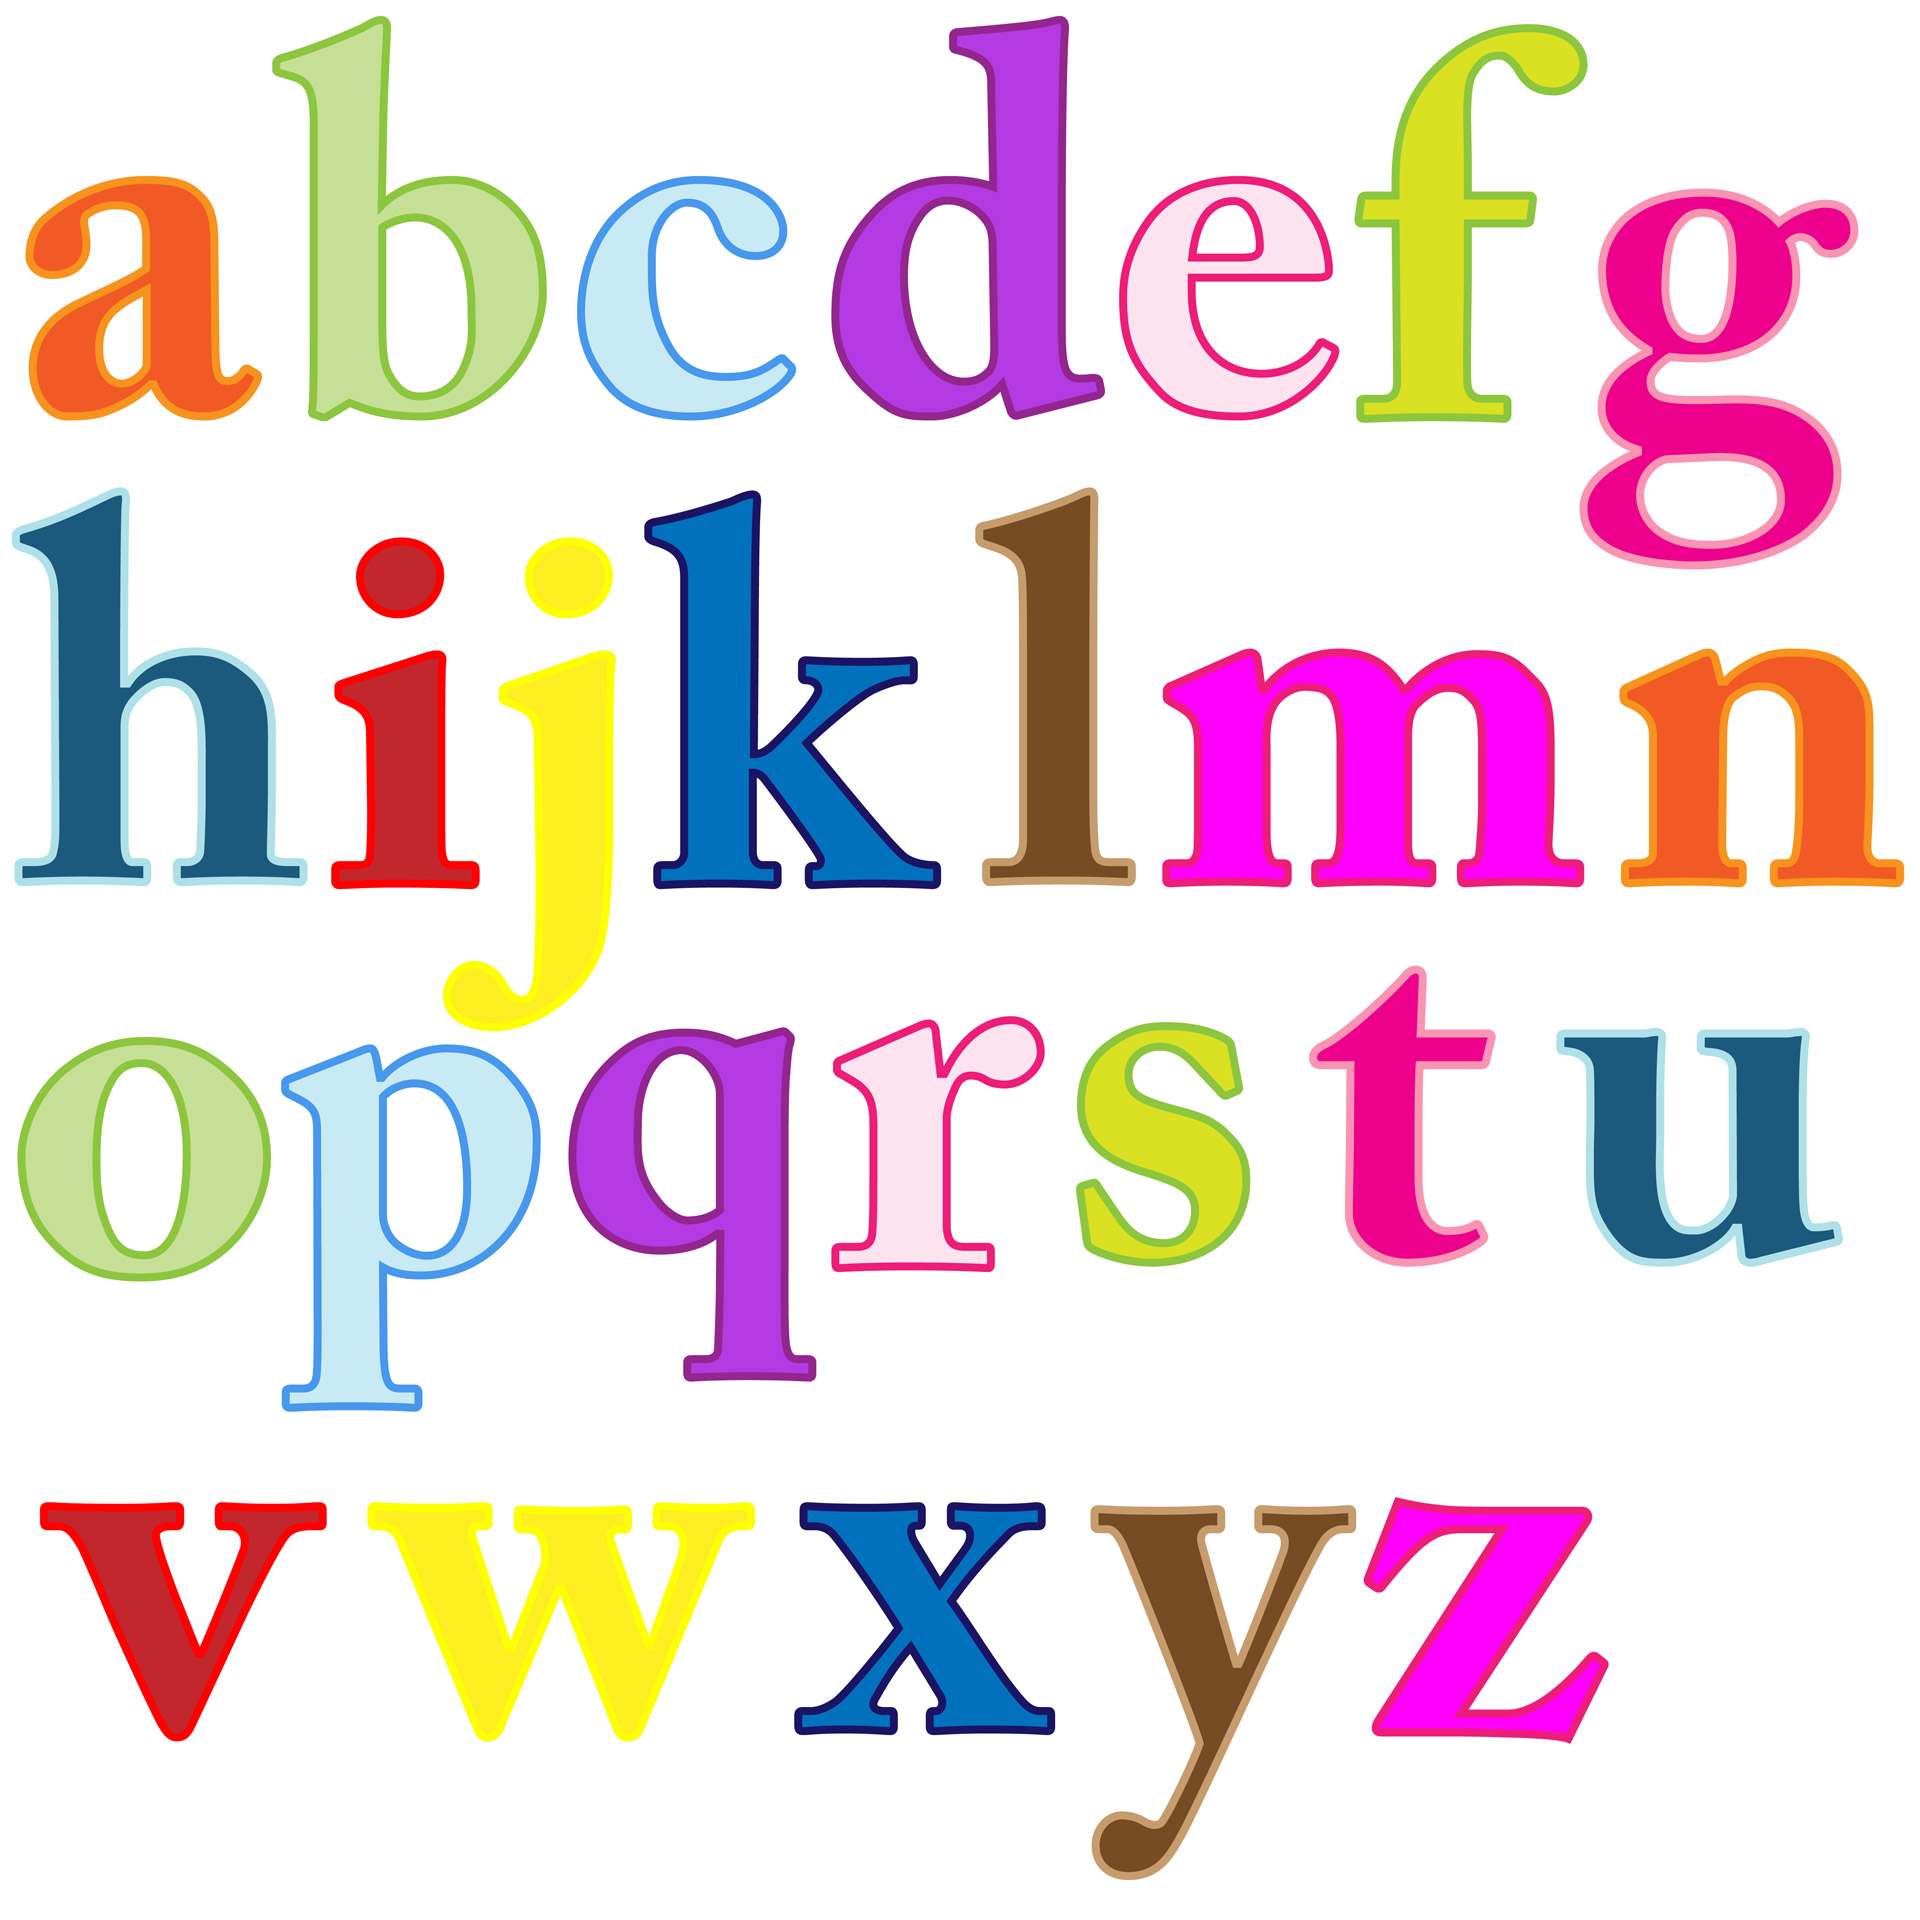 free clipart letters of alphabets - photo #4